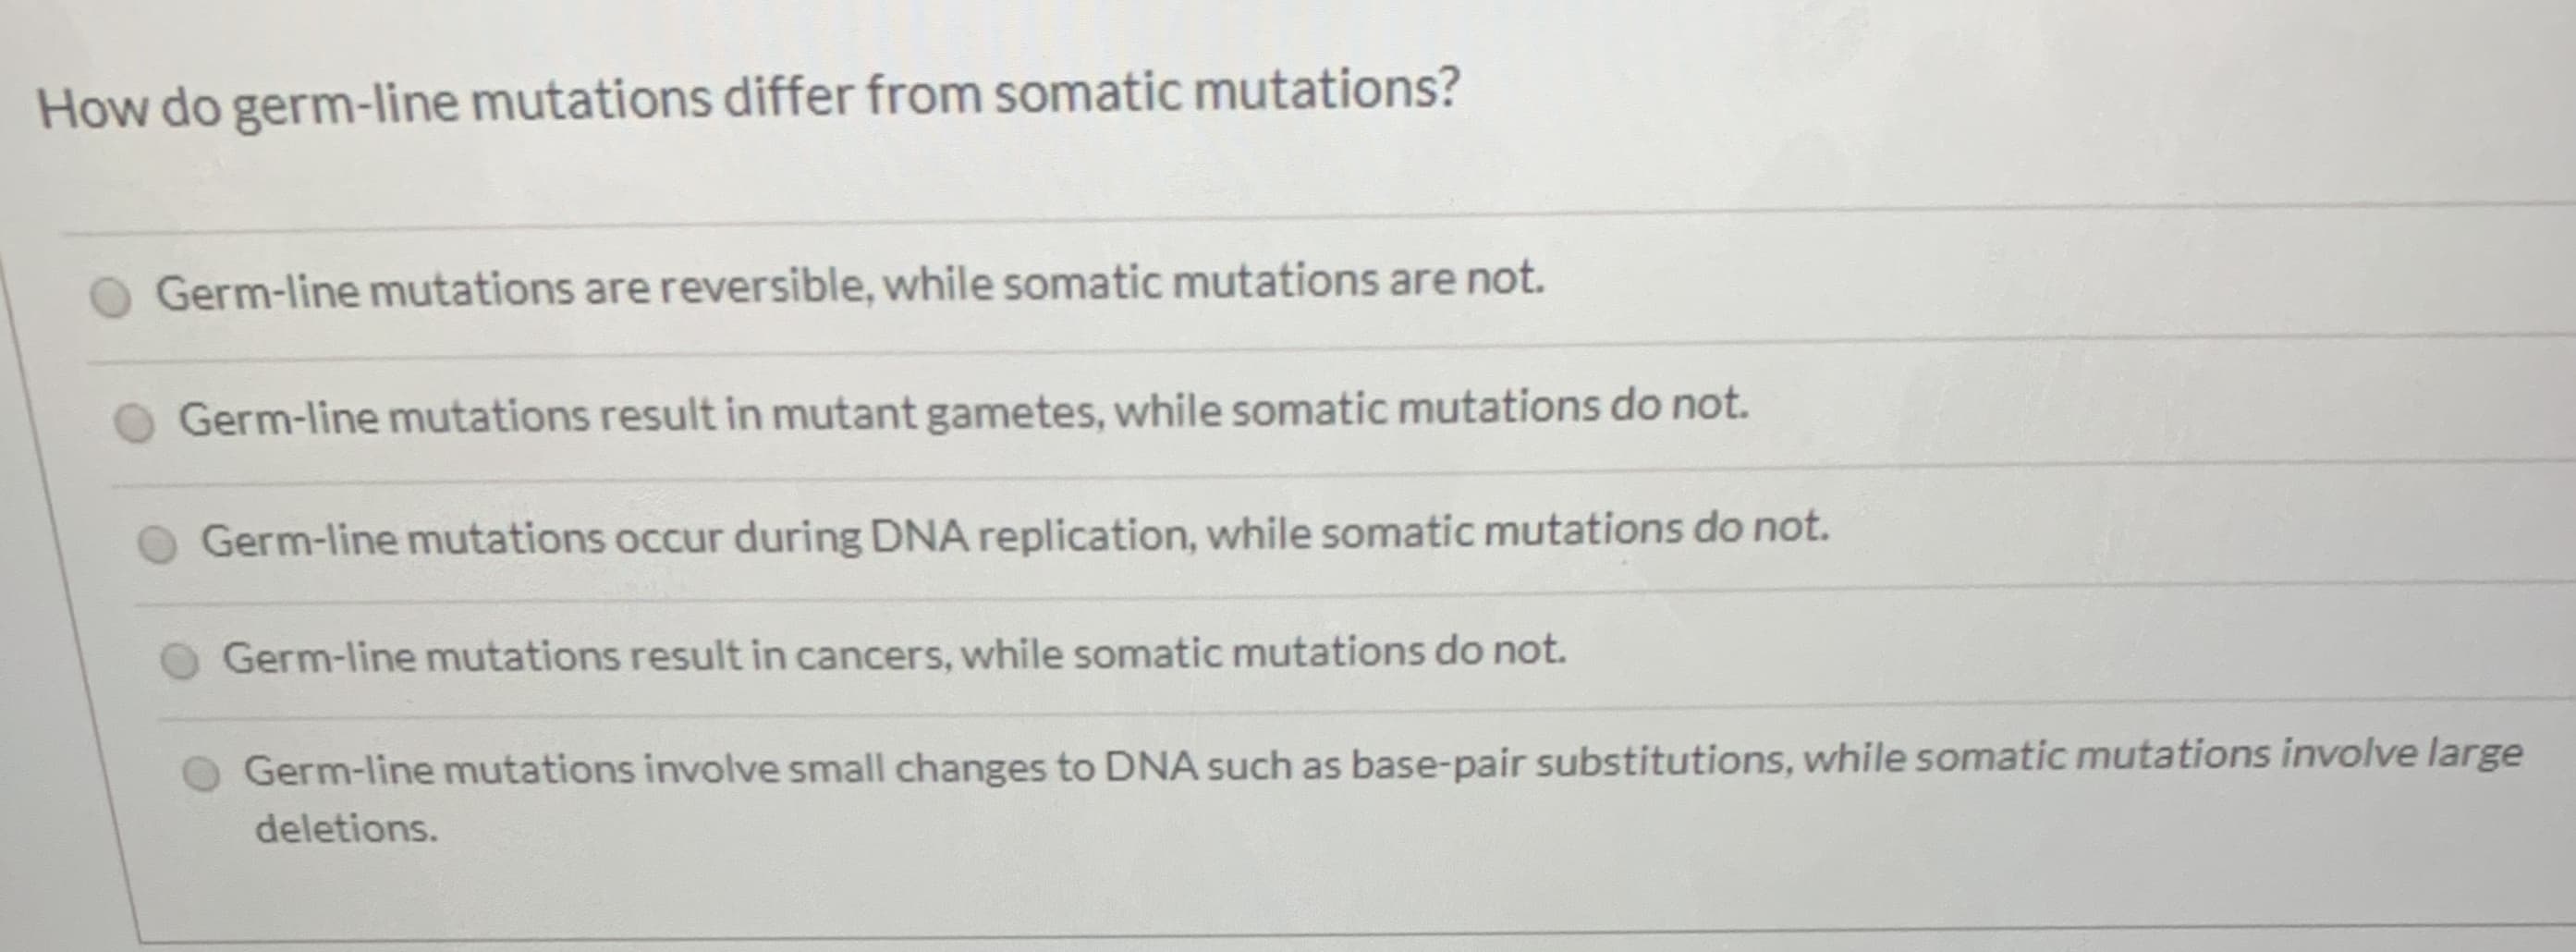 How do germ-line mutations differ from somatic mutations?
Germ-line mutations are reversible, while somatic mutations are not.
Germ-line mutations result in mutant gametes, while somatic mutations do not.
Germ-line mutations occur during DNA replication, while somatic mutations do not.
Germ-line mutations result in cancers, while somatic mutations do not.
Germ-line mutations involve small changes to DNA such as base-pair substitutions, while somatic mutations involve large
deletions.
